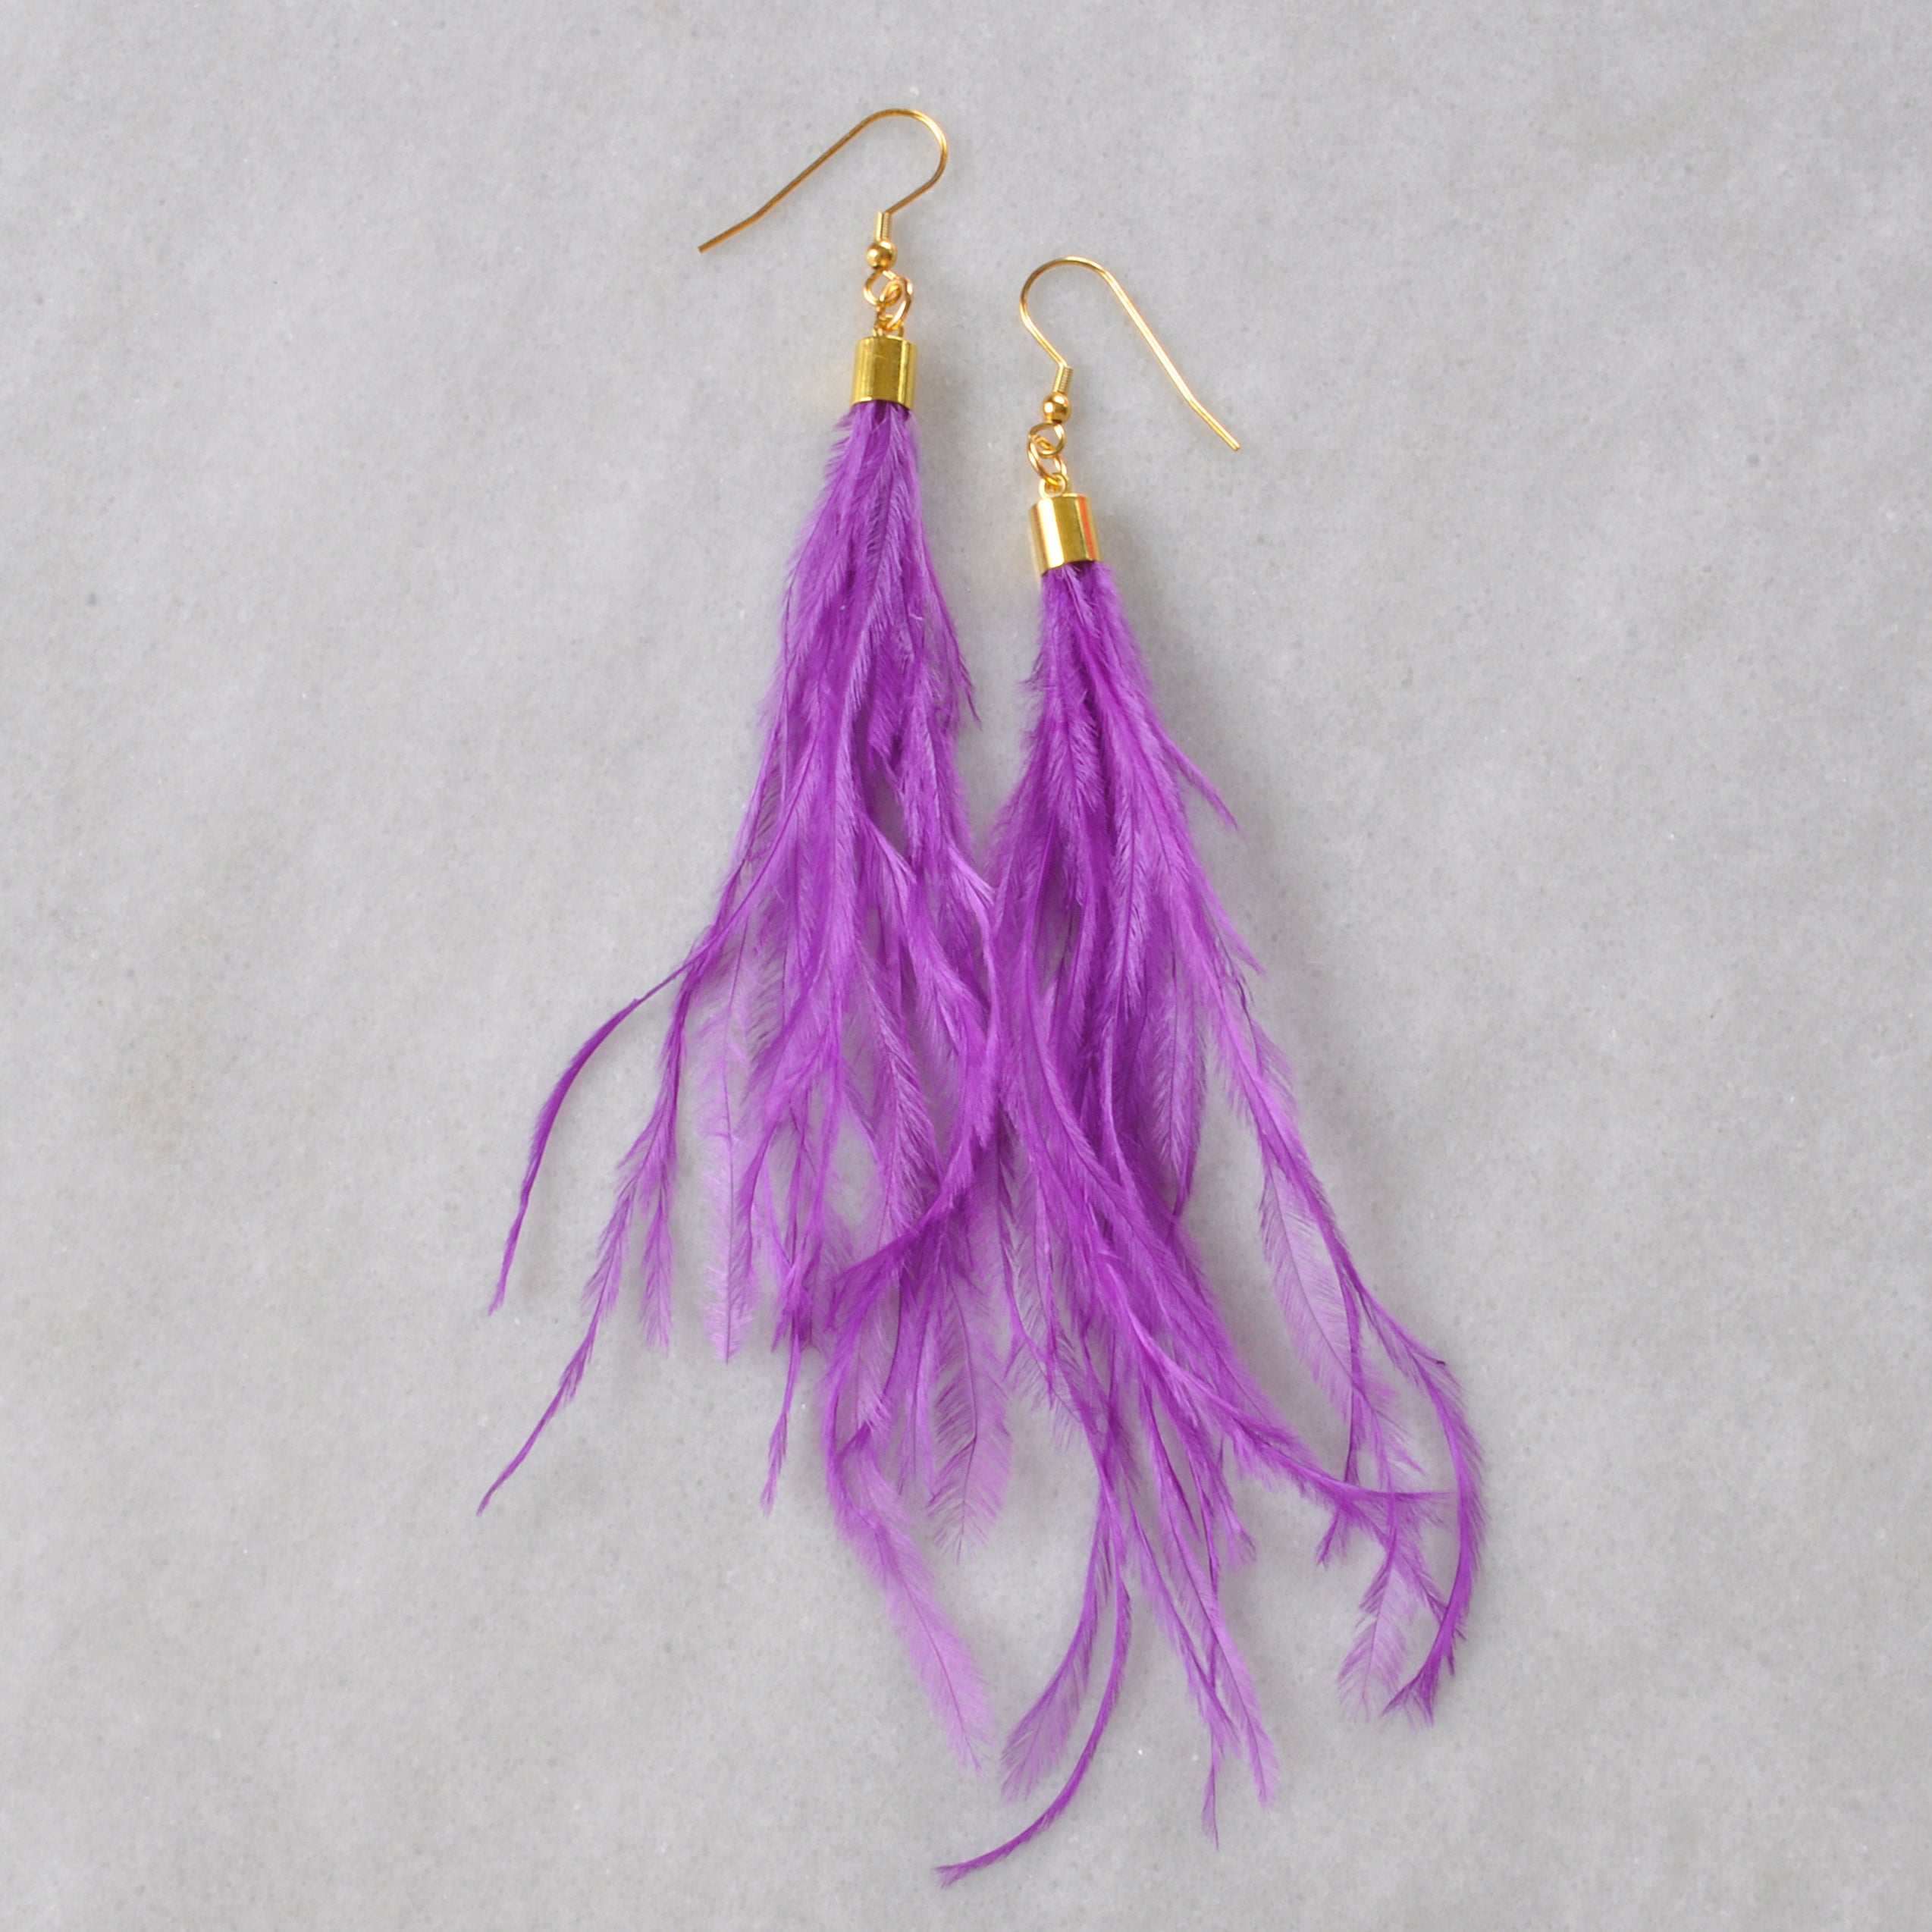 Bright Purple Ostrich Feather Earrings - CLEARANCE